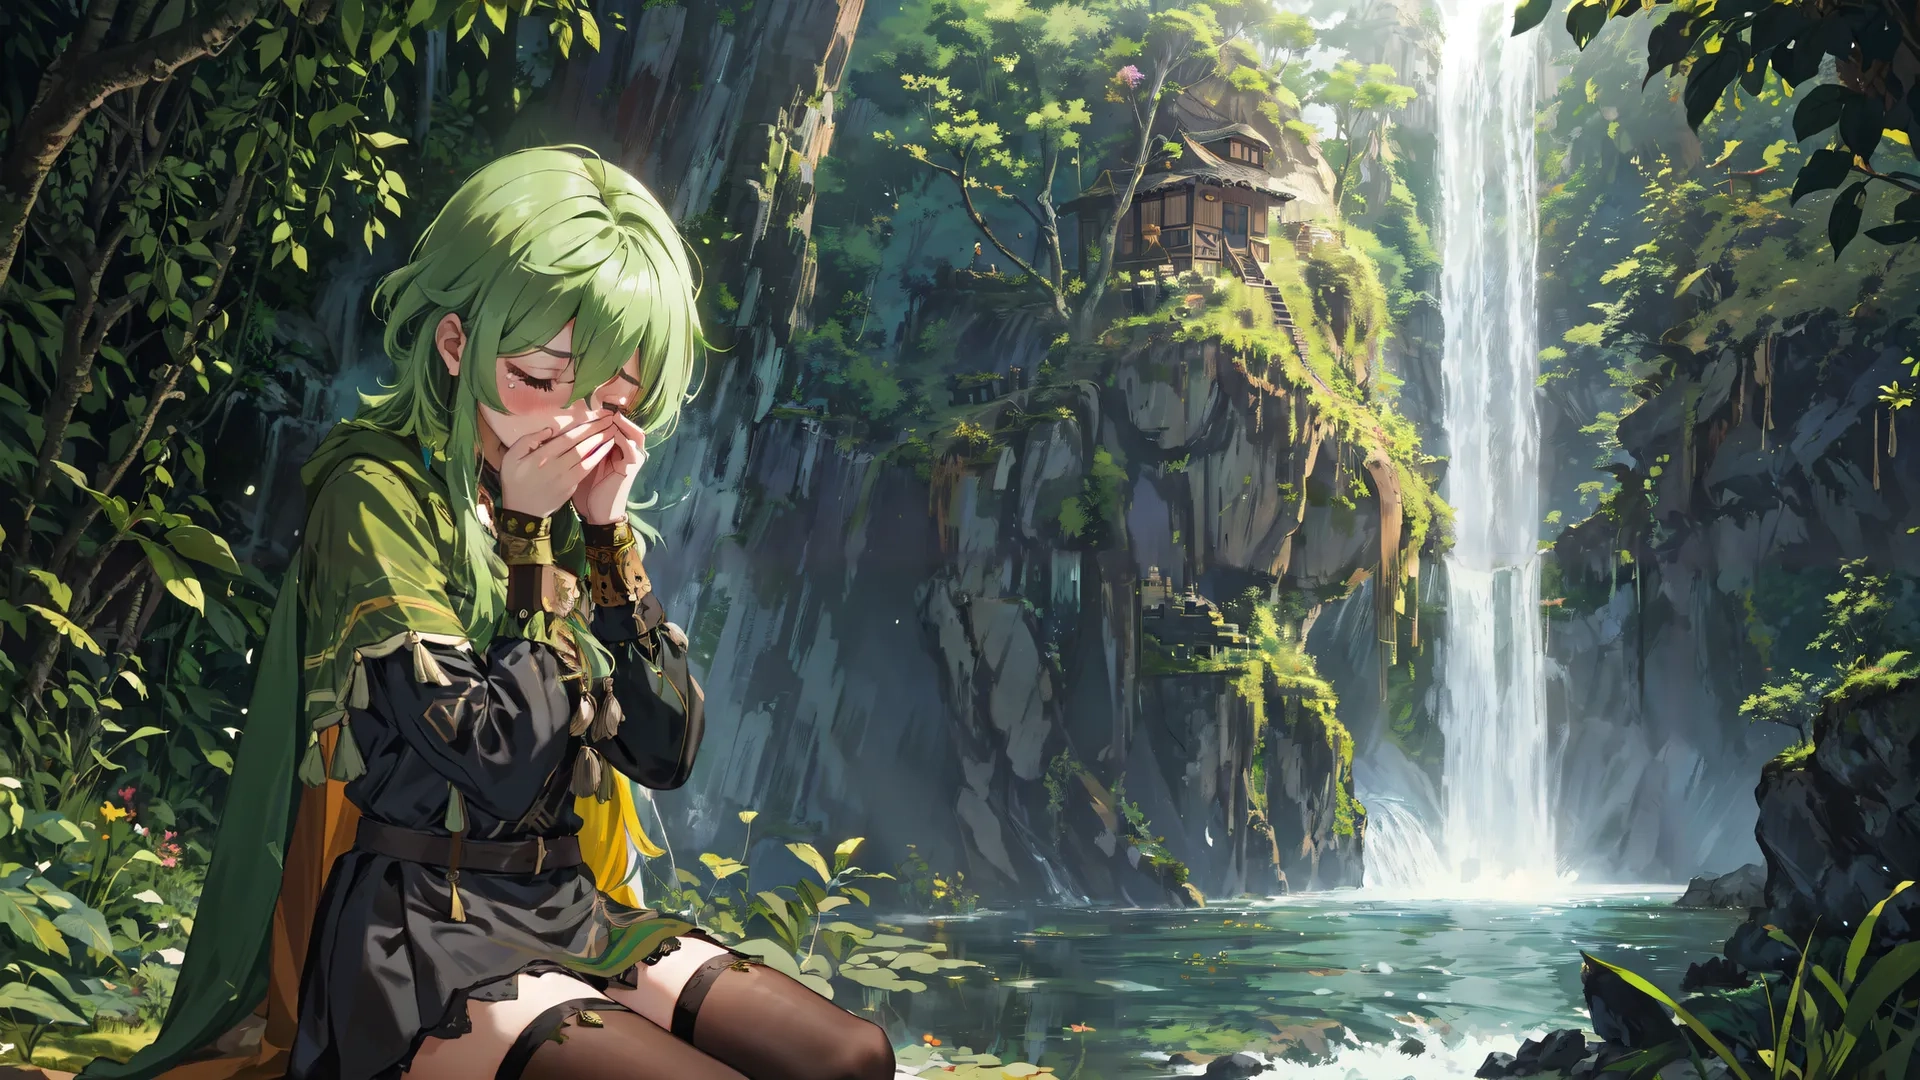 a girl in the grass at the edge of a waterfall sitting down by herself, covered with foliage, with a mountain range in the background
